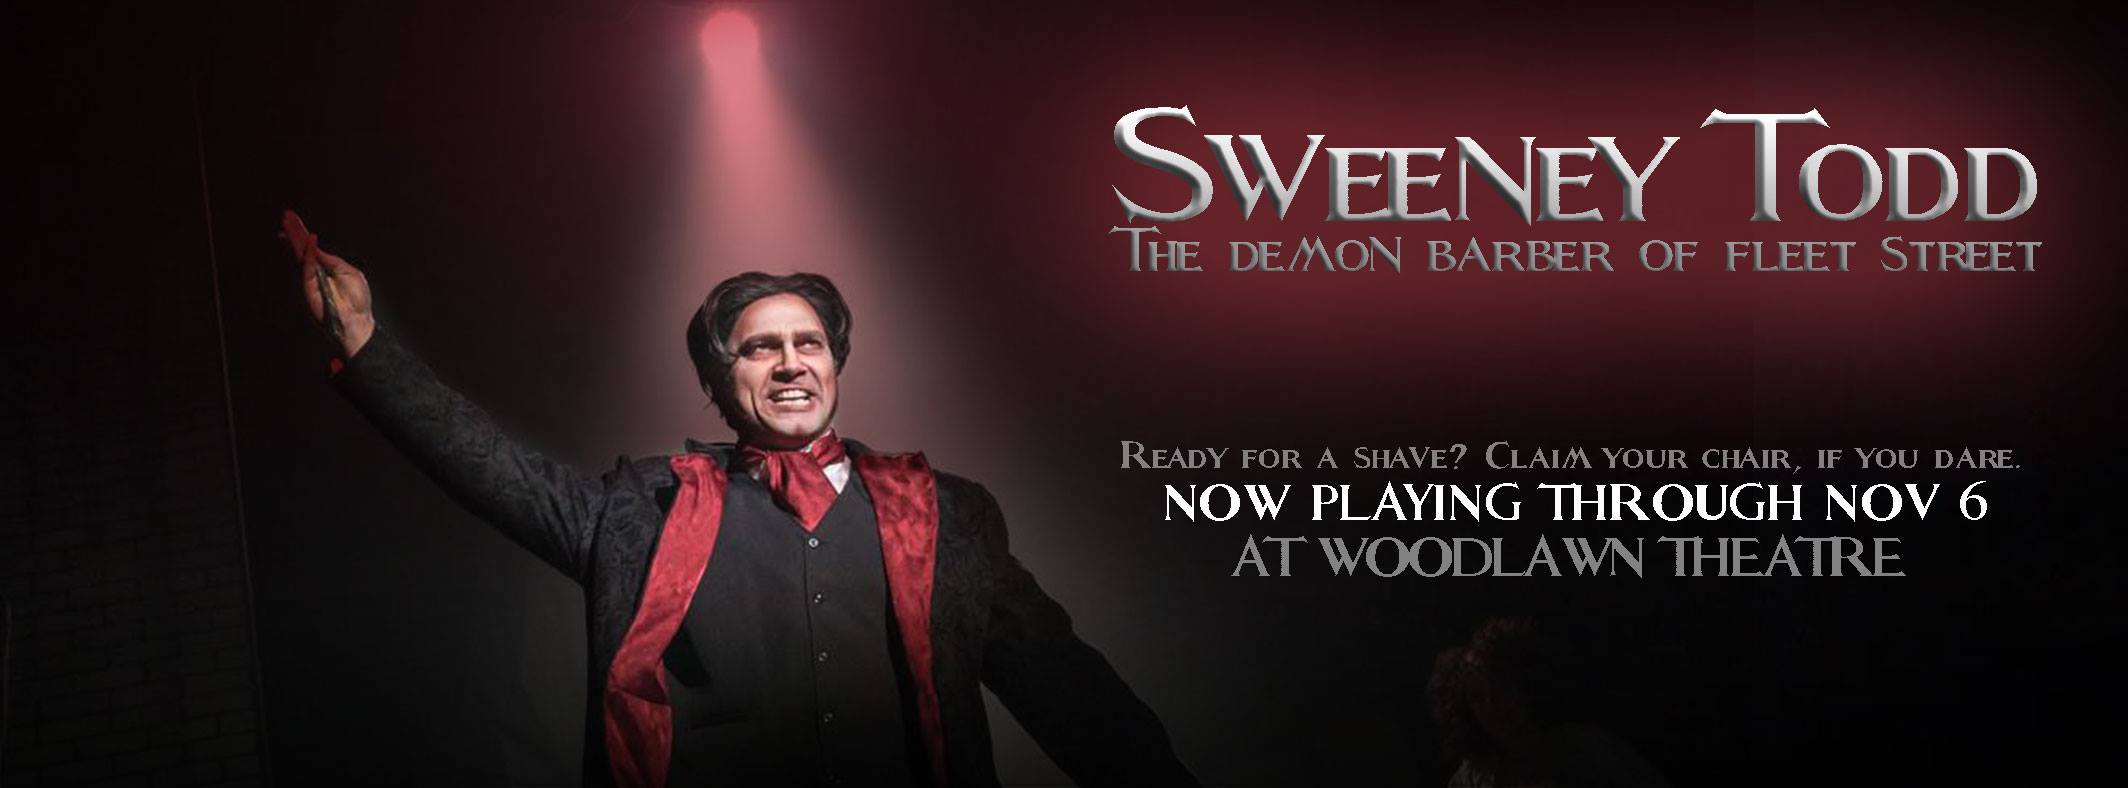 Sweeney Todd by Woodlawn Theatre